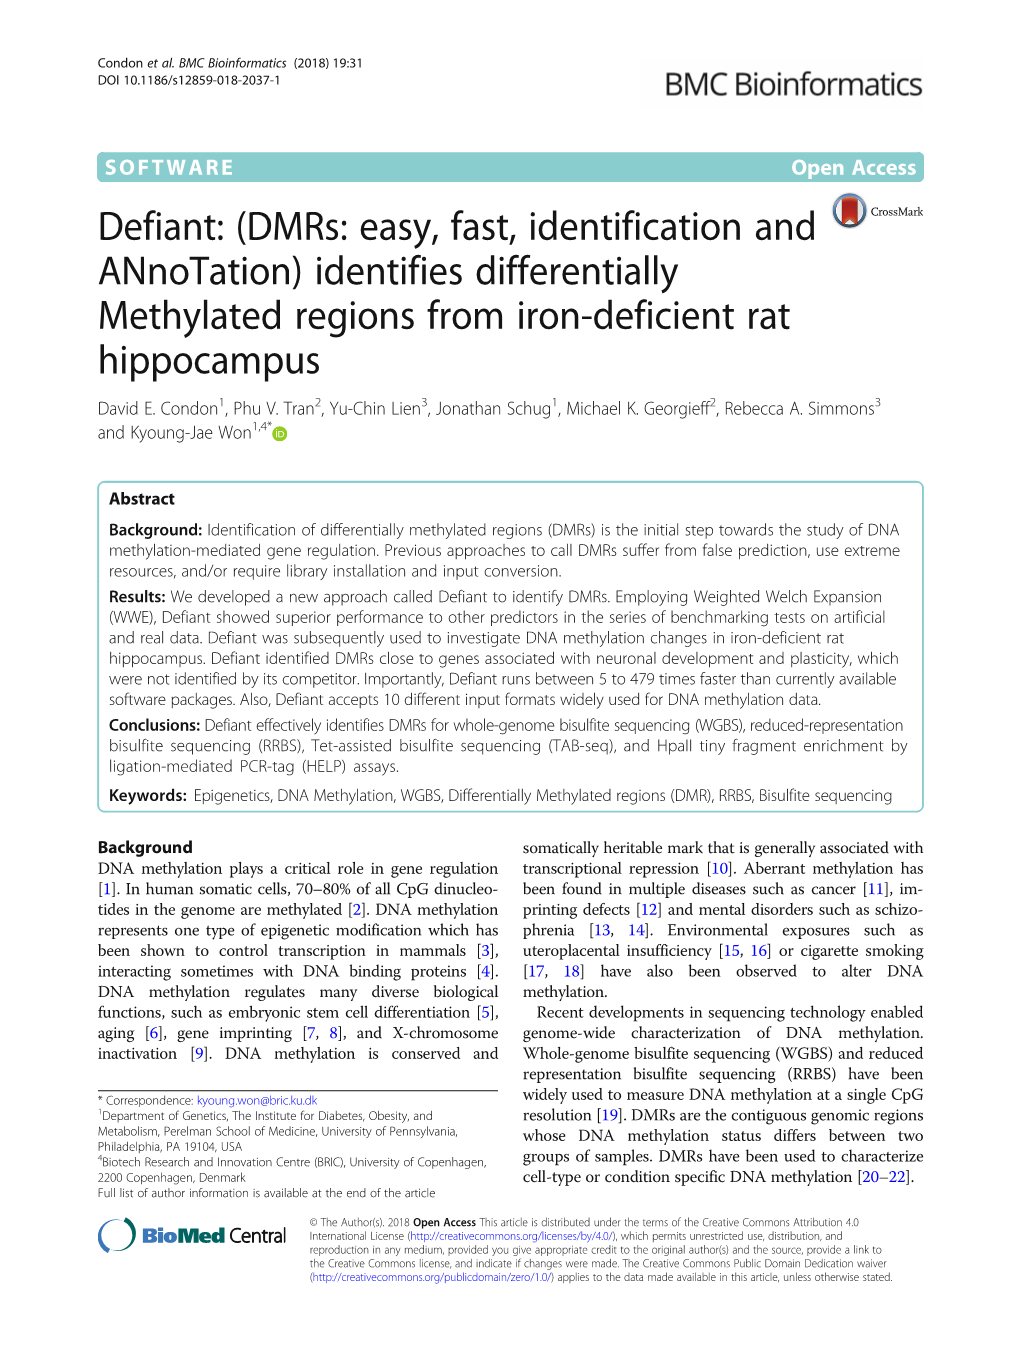 Identifies Differentially Methylated Regions from Iron-Deficient Rat Hippocampus David E